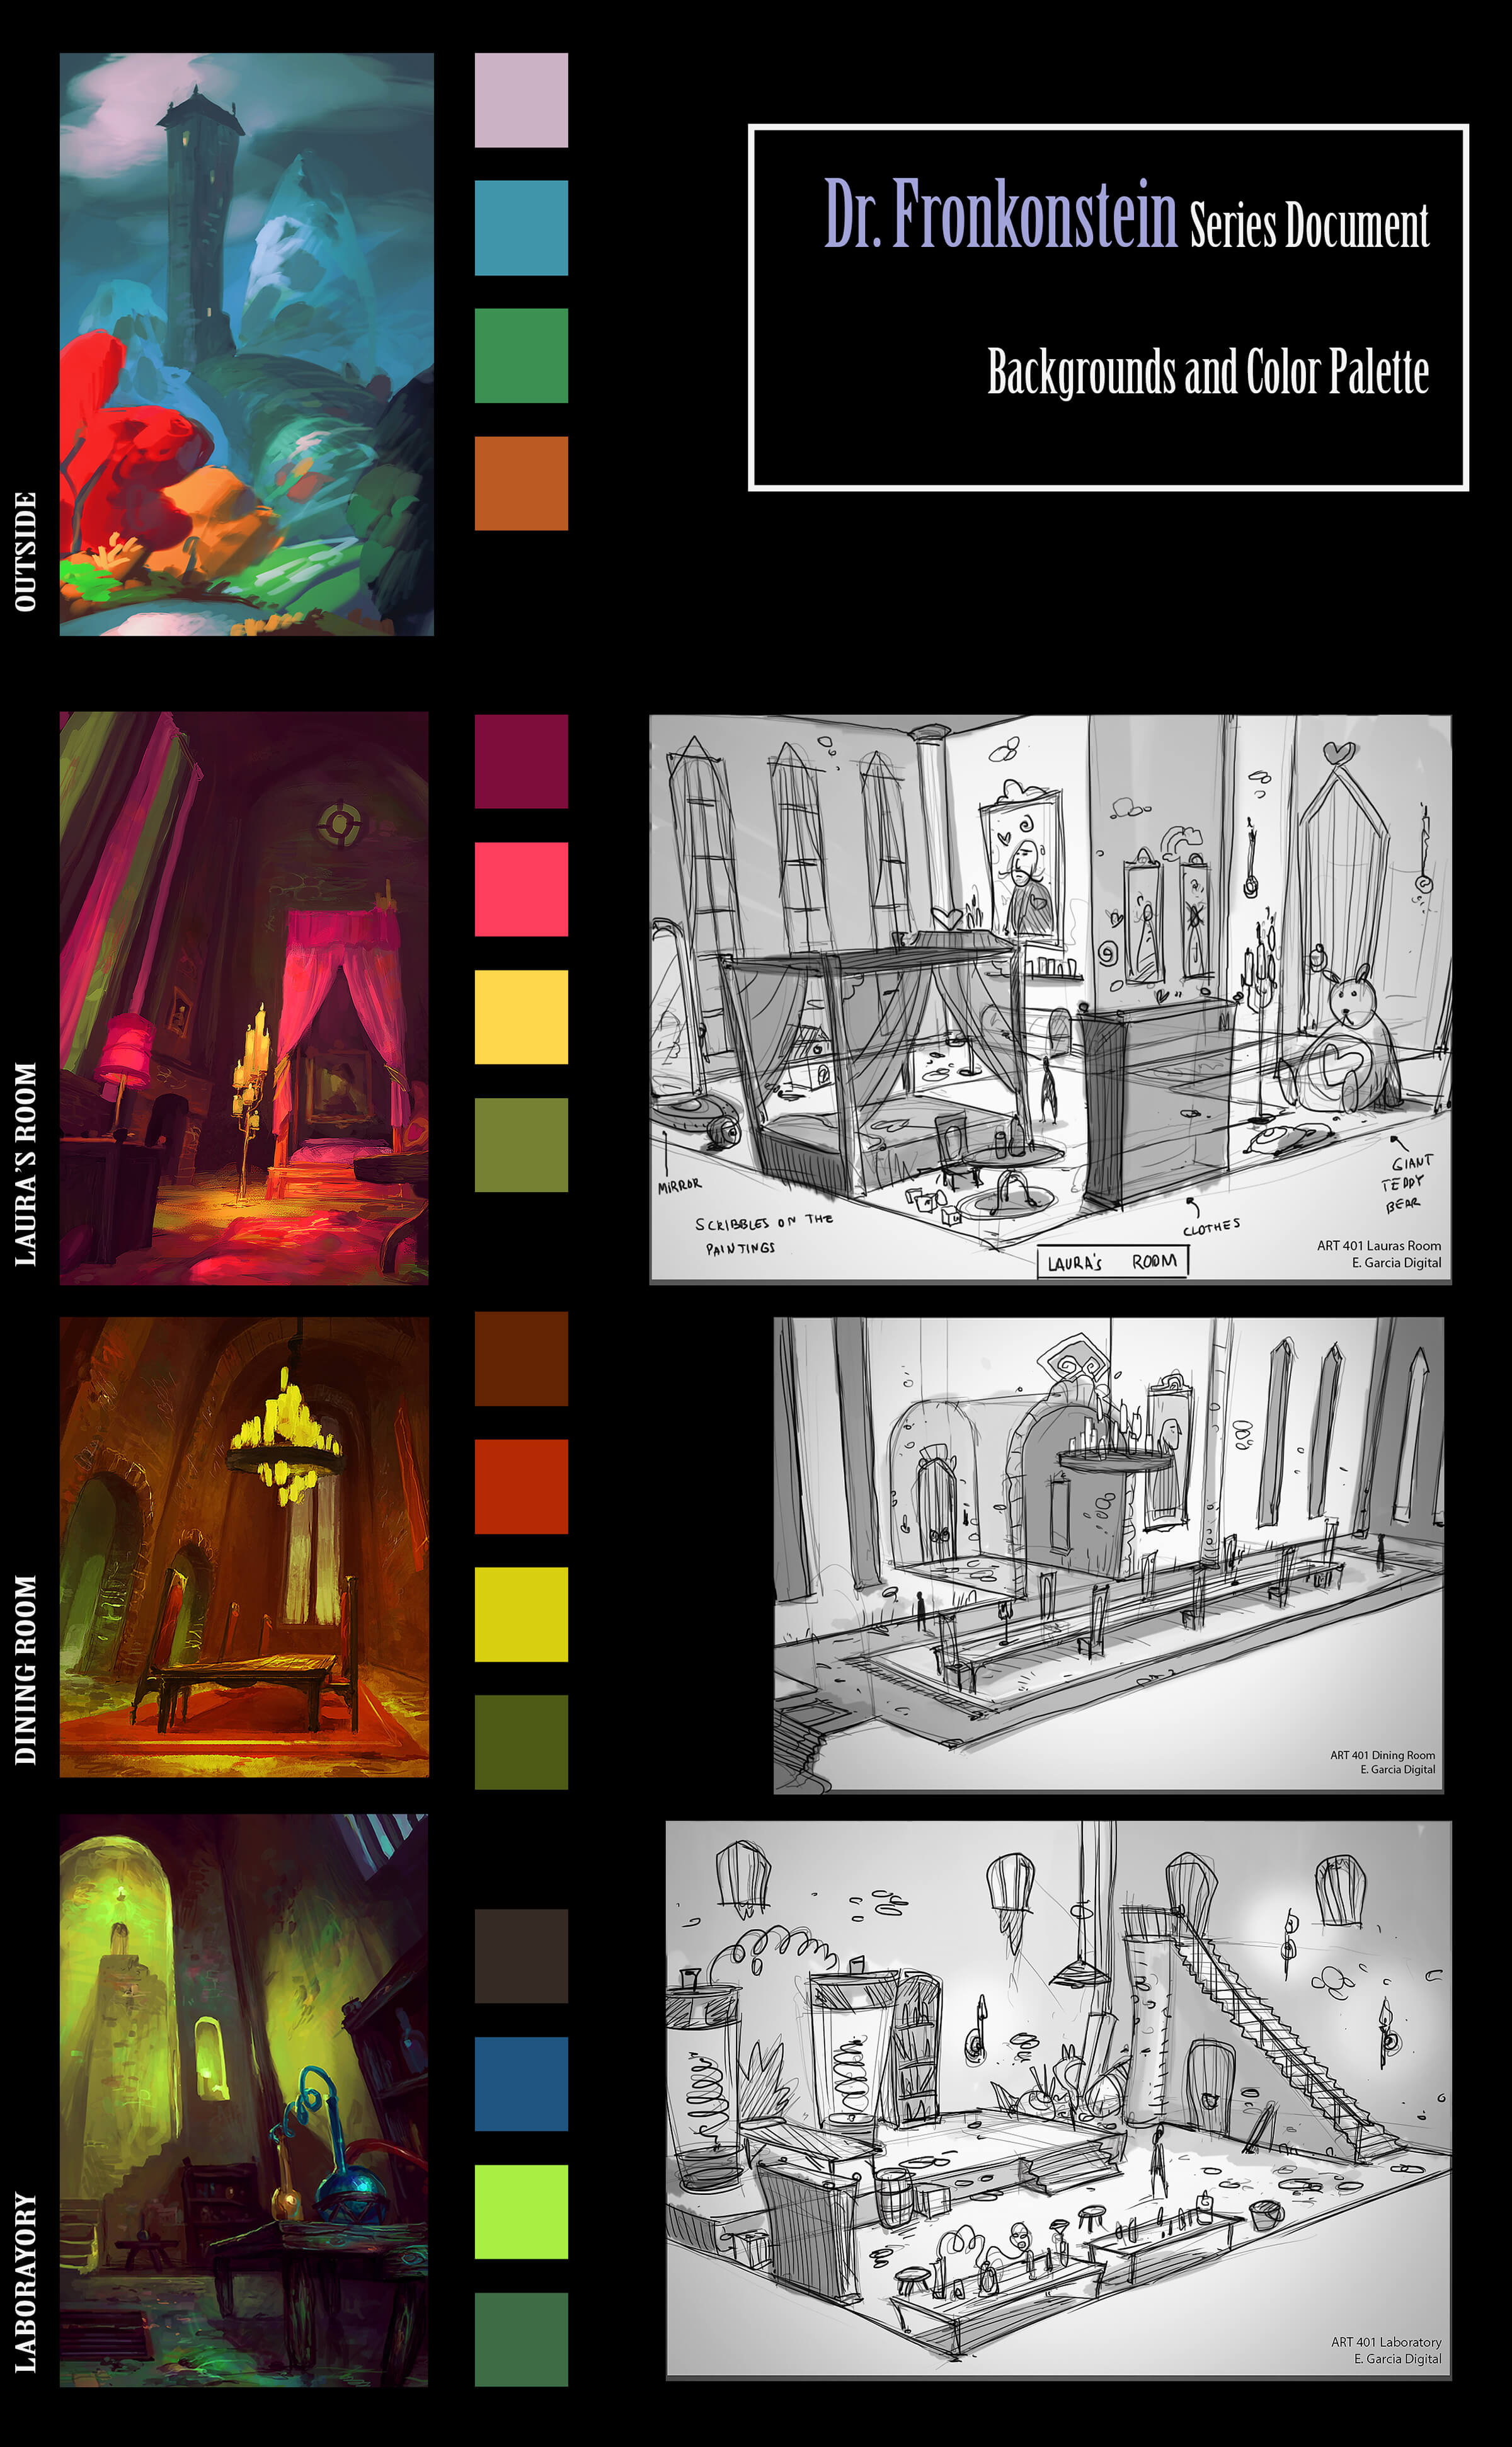 Black-and-white and color sketches of a spooky castle, bedroom, dining room, and laboratory.